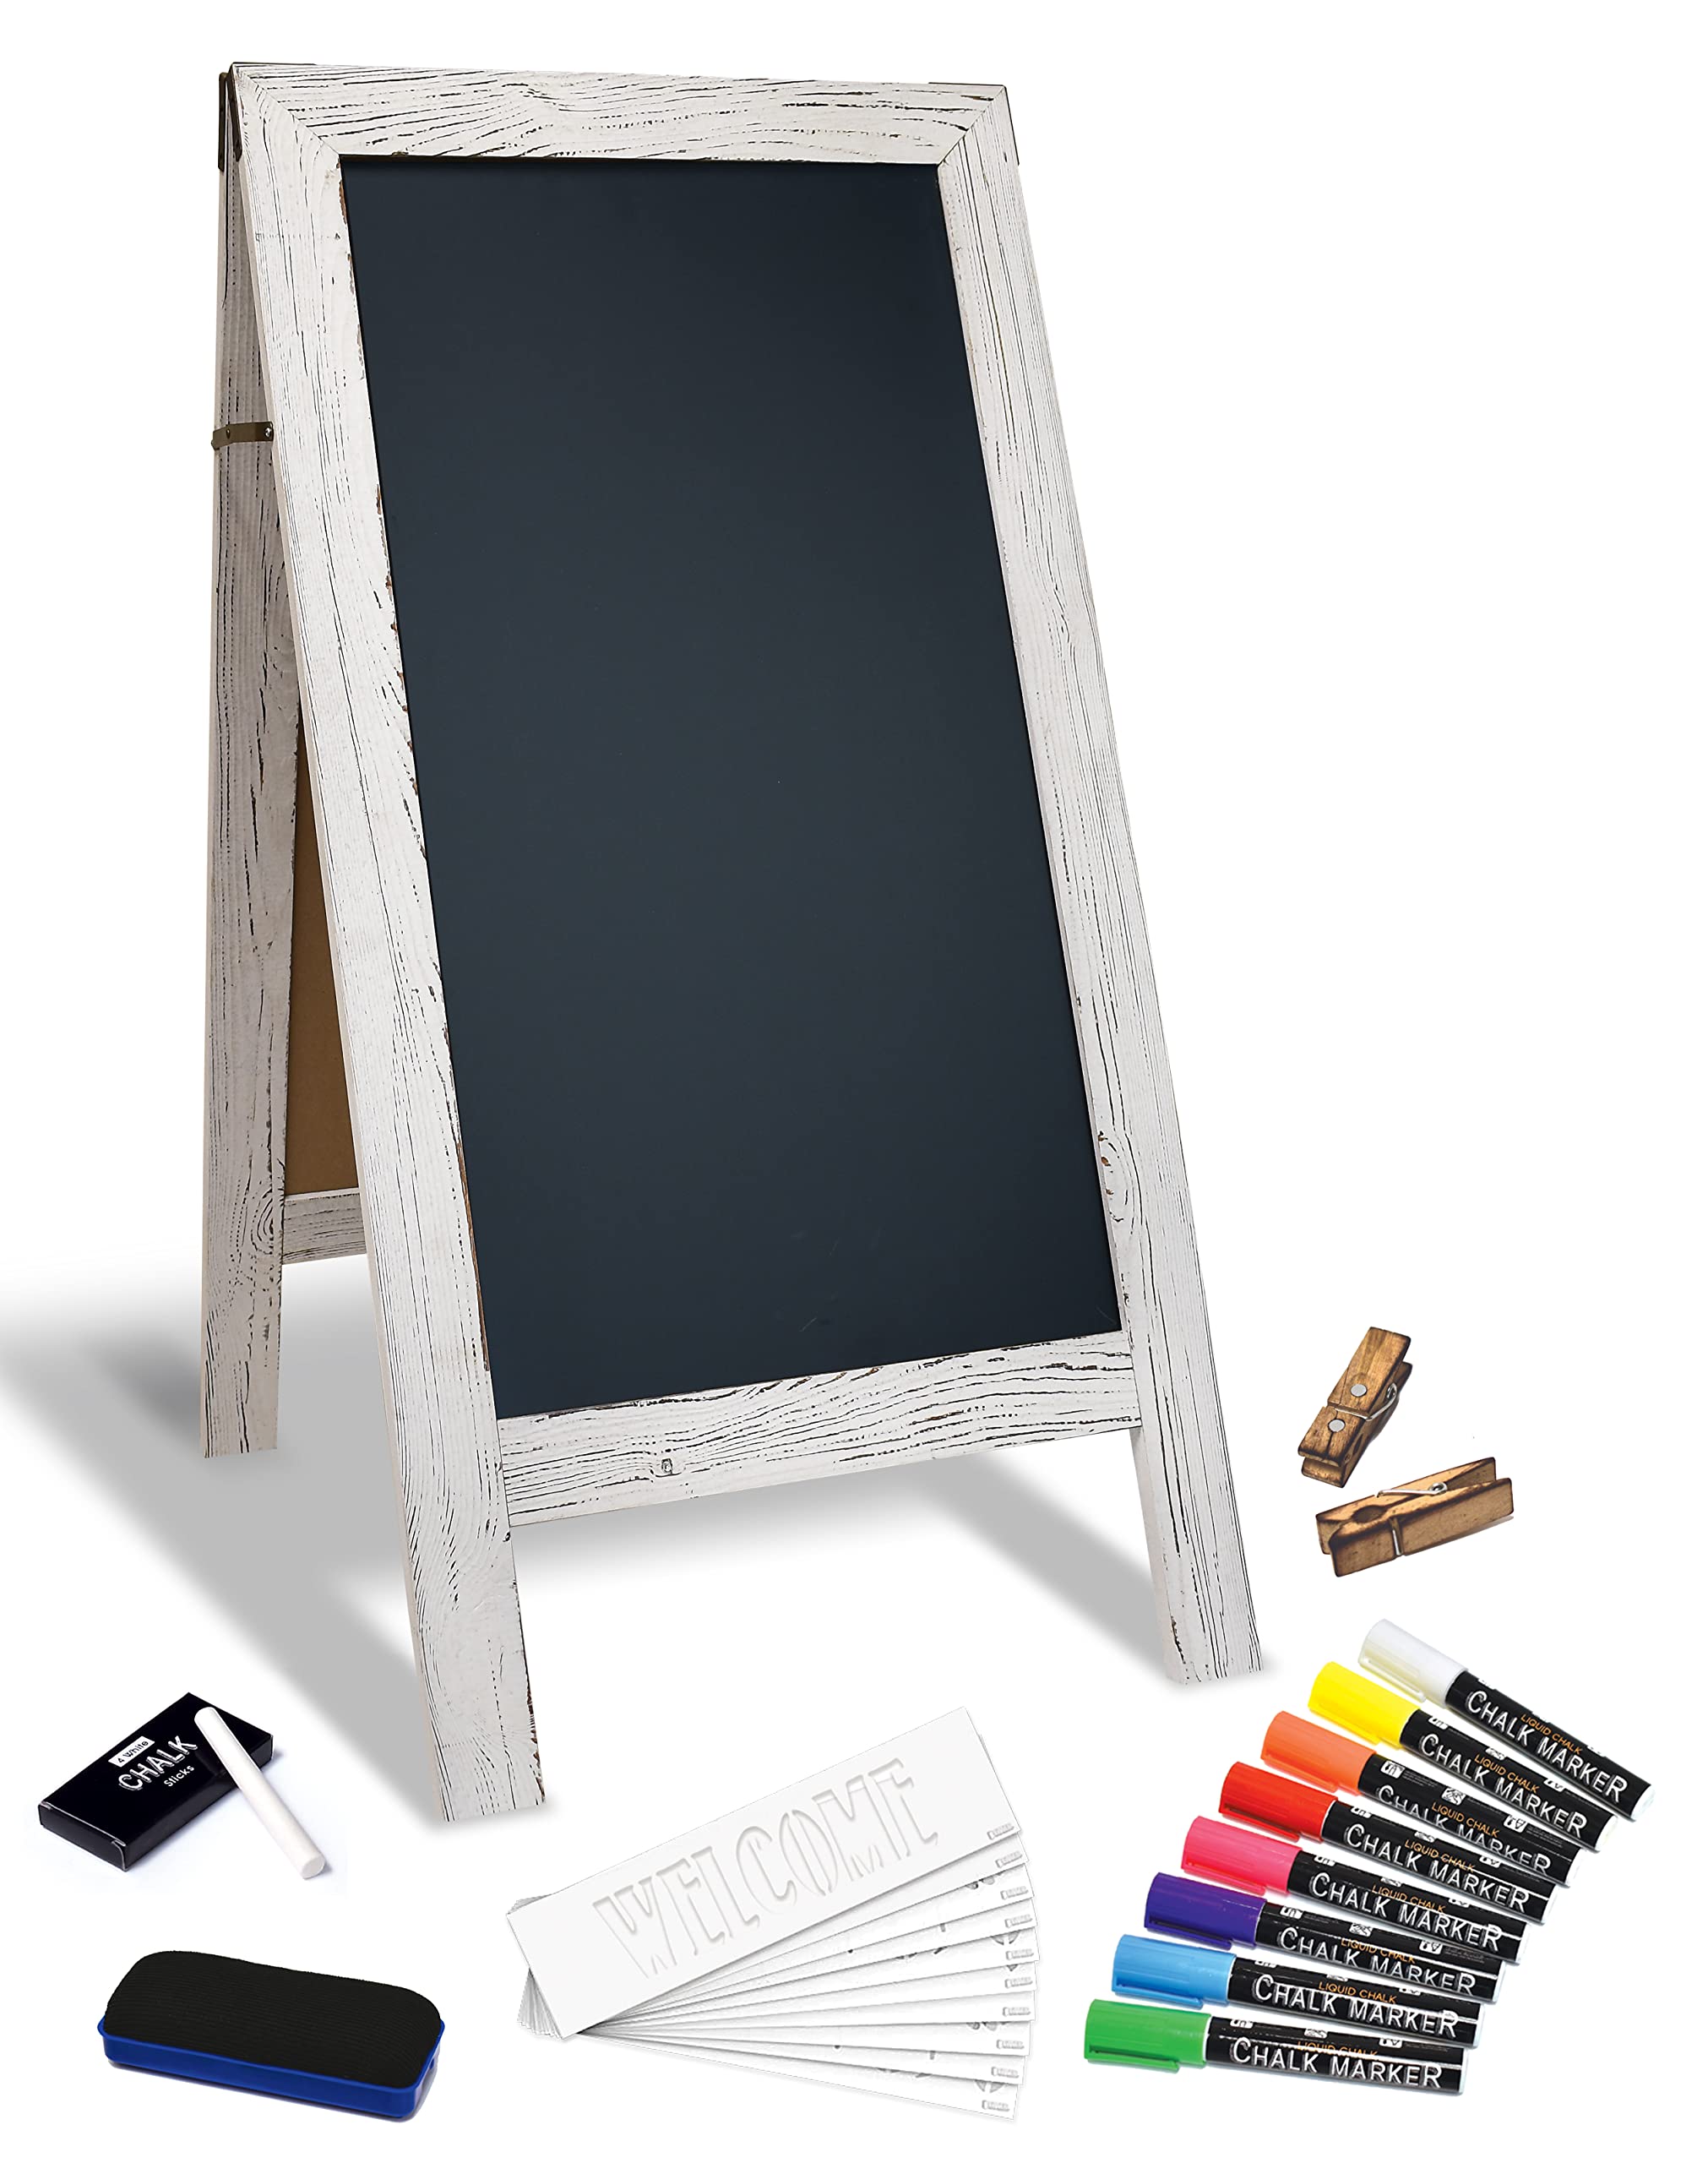 Magnetic A-Frame Chalkboard Sign, Extra Large 20 inch x 40 inch, Standing Chalkboard Easel, Deluxe Set with Multiple Accessories, Outdoor Sidewalk